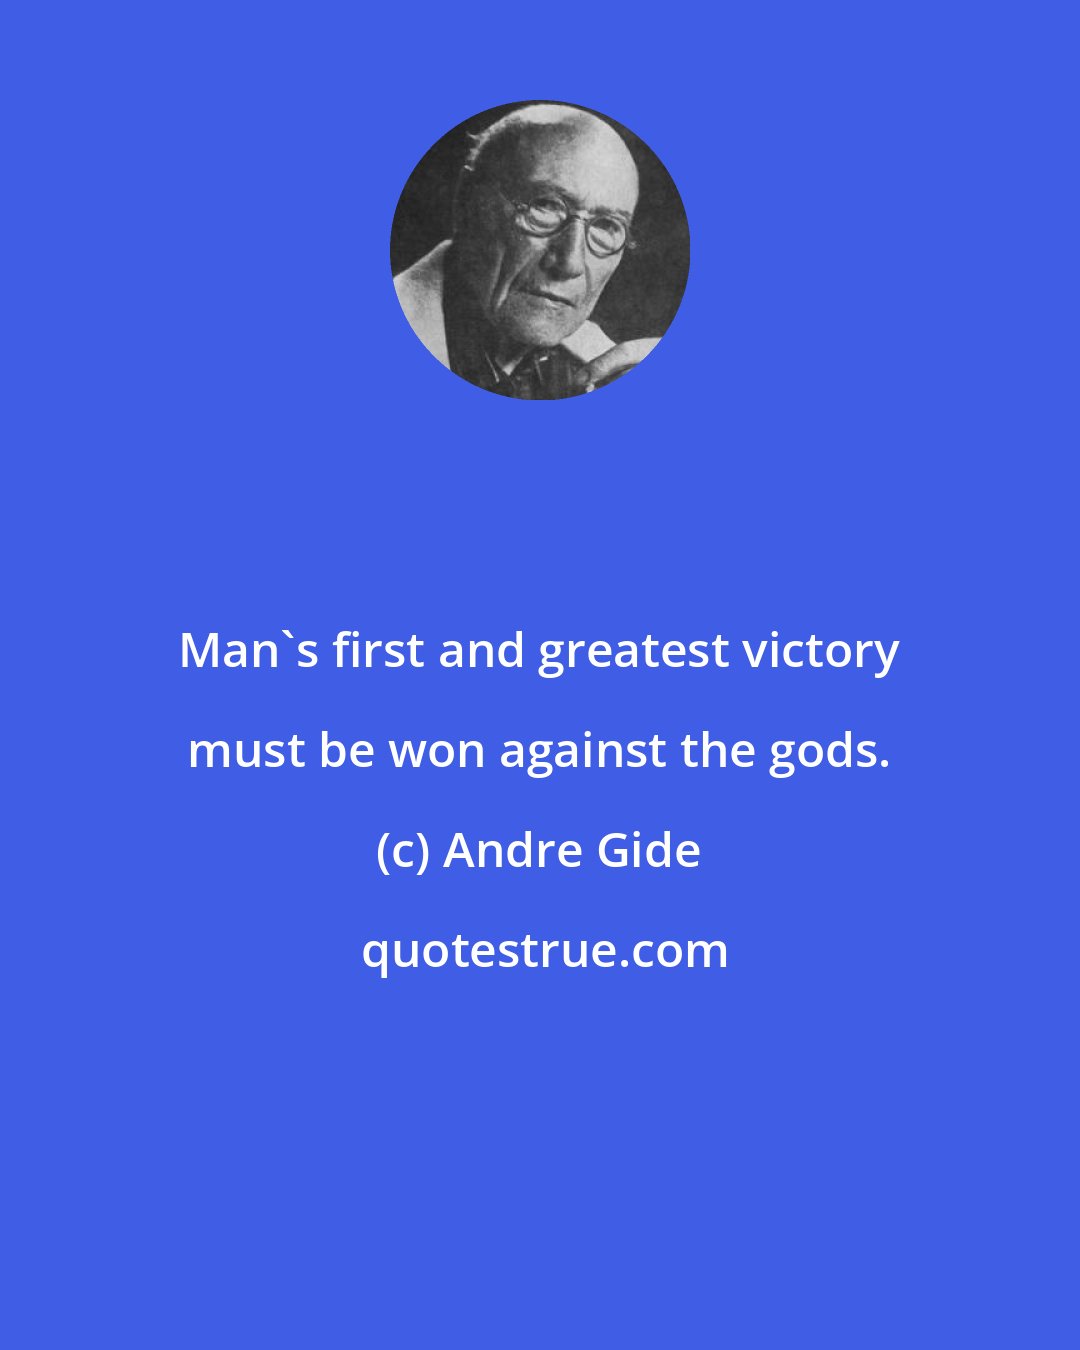 Andre Gide: Man's first and greatest victory must be won against the gods.